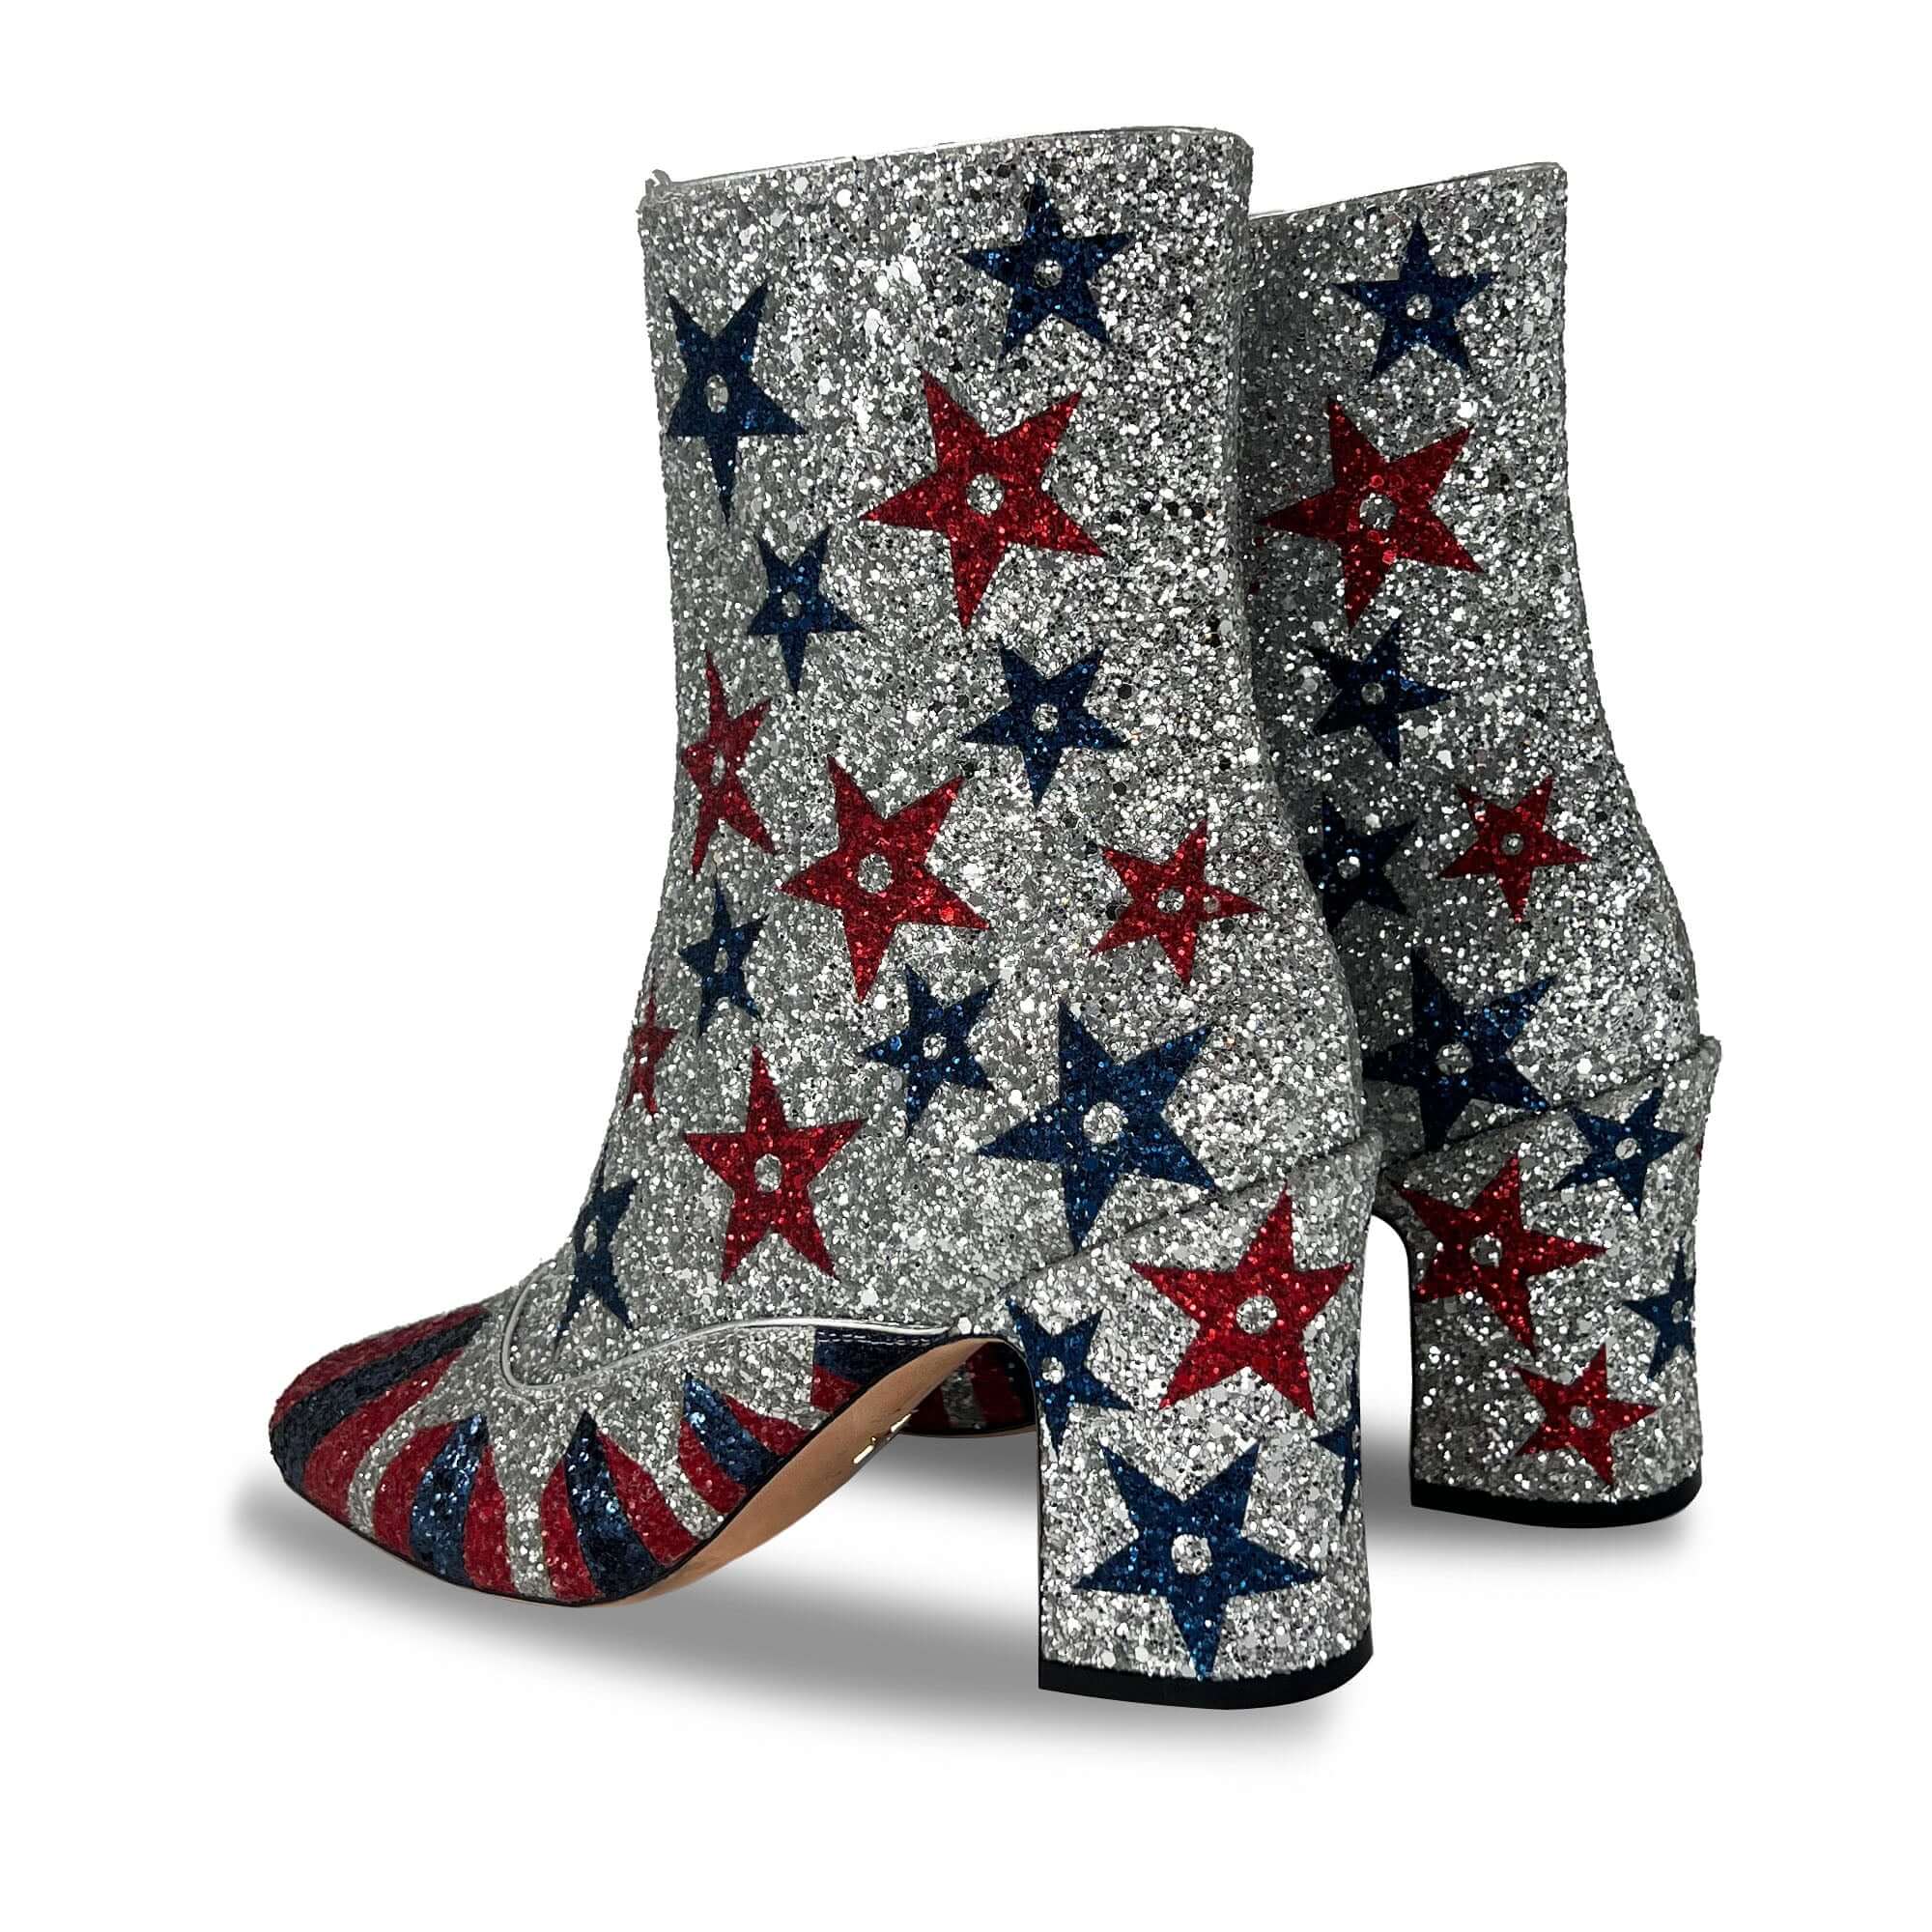 Dior SS19 circus themed strass heeled boots